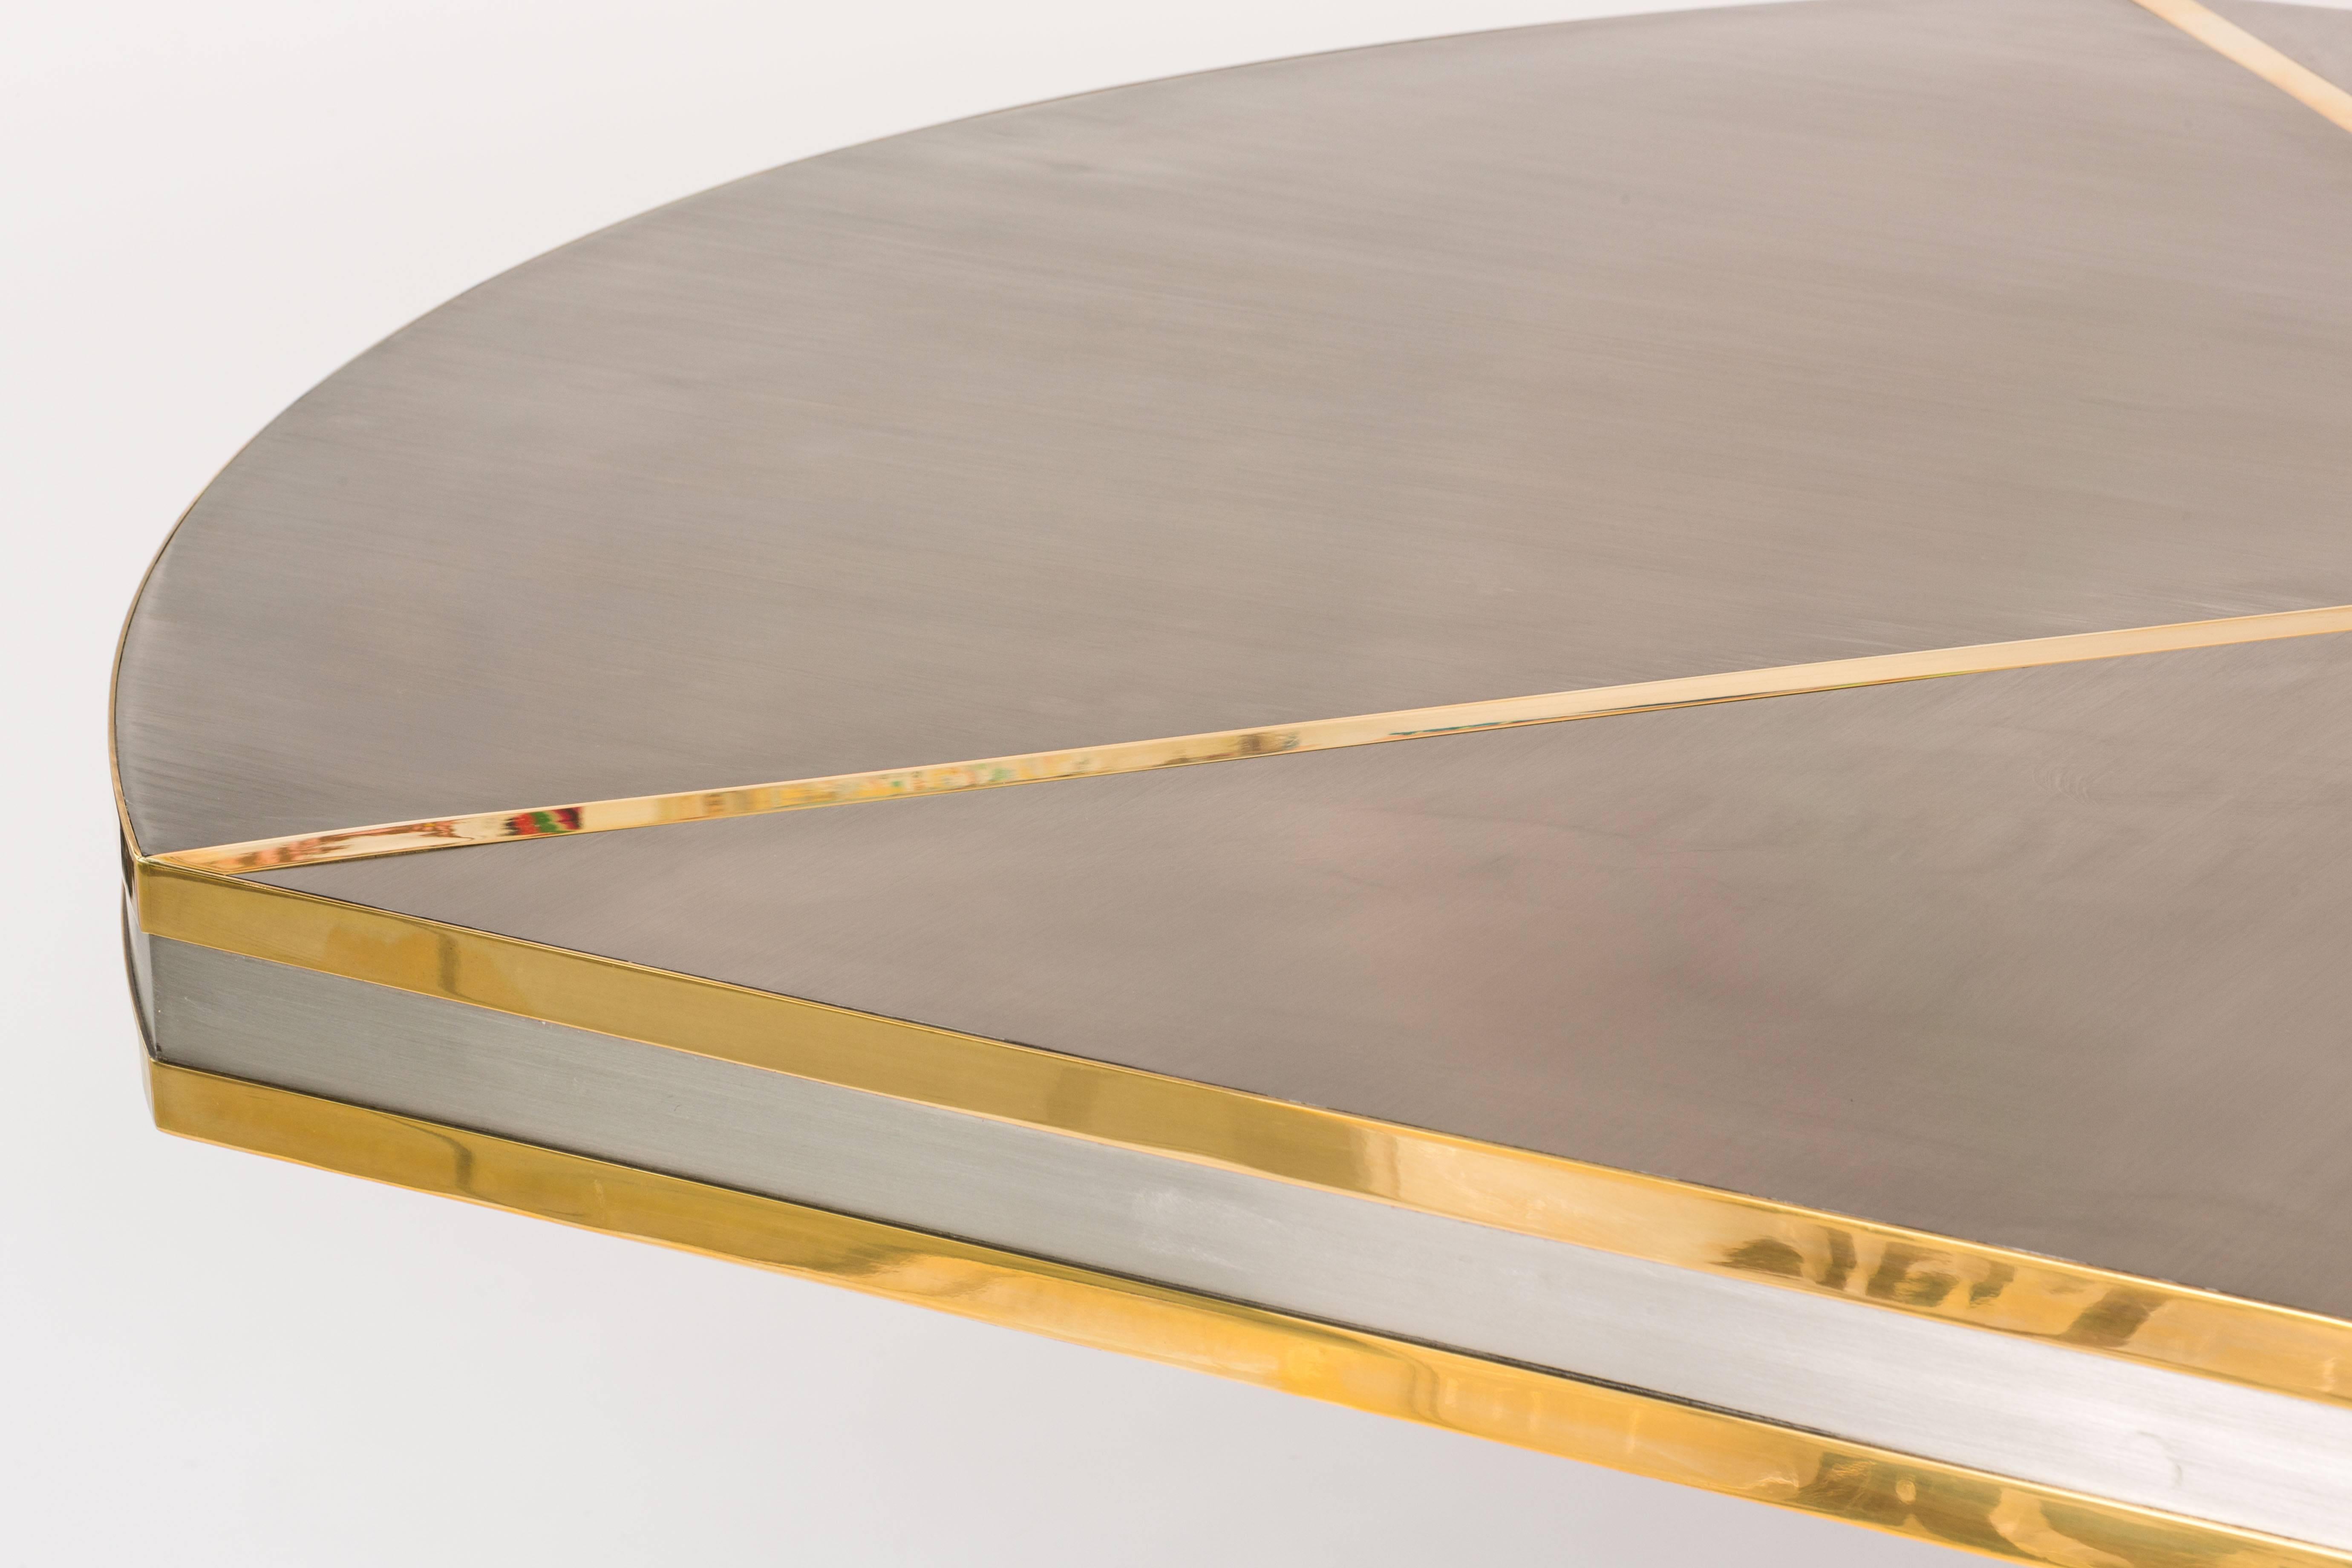 This dining table is guaranteed to provide memorable dining occasions for years to come. The brass on stainless is glamorous without being ostentatious. The stunning brass details highlight the tabletop with two bands while three (3) brass hoops